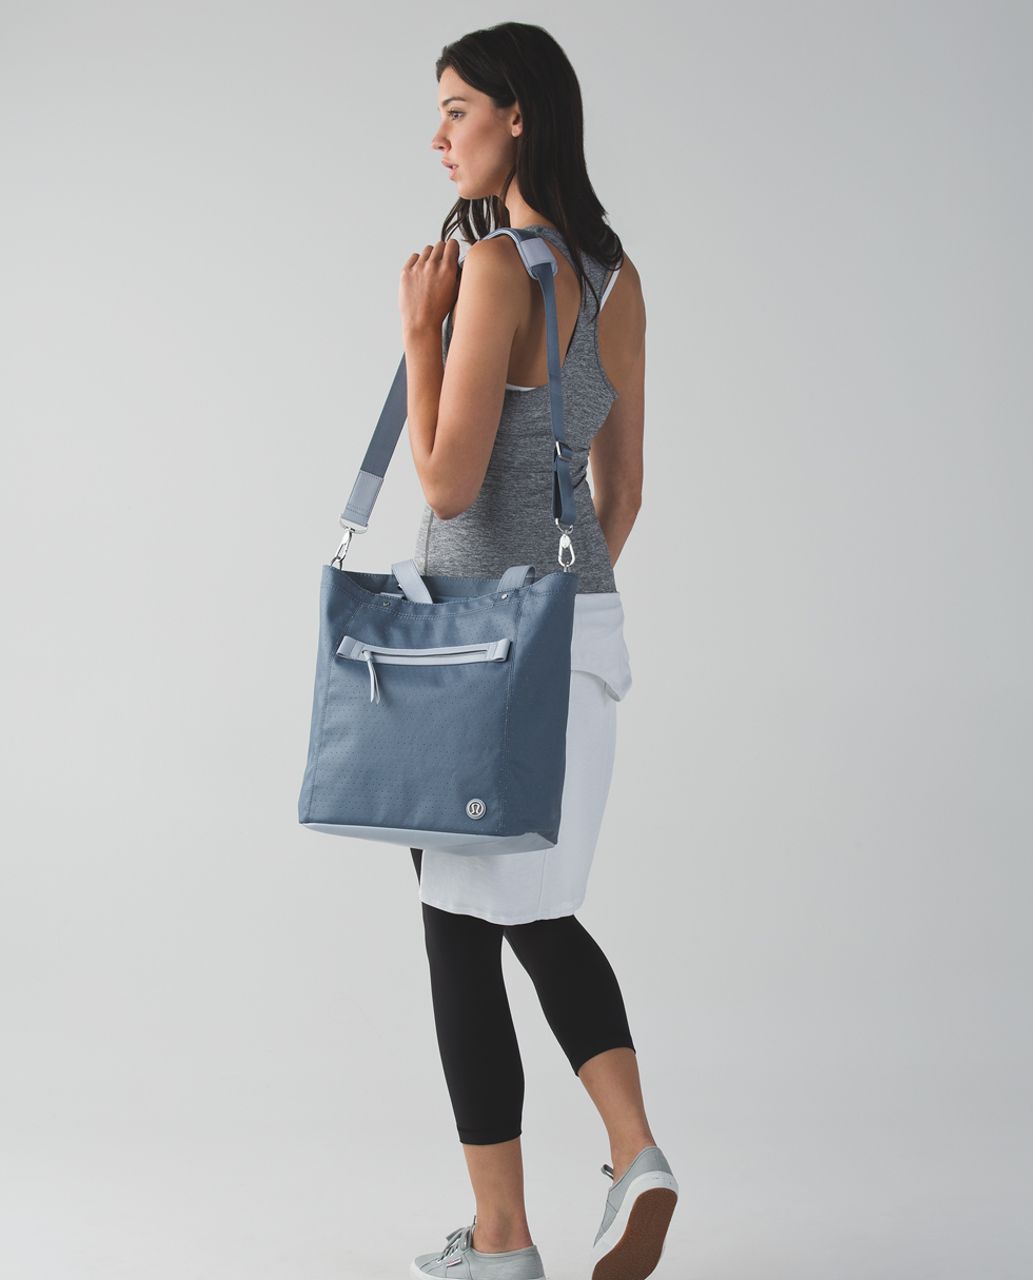 Lululemon Out & About Tote - Blue Denim